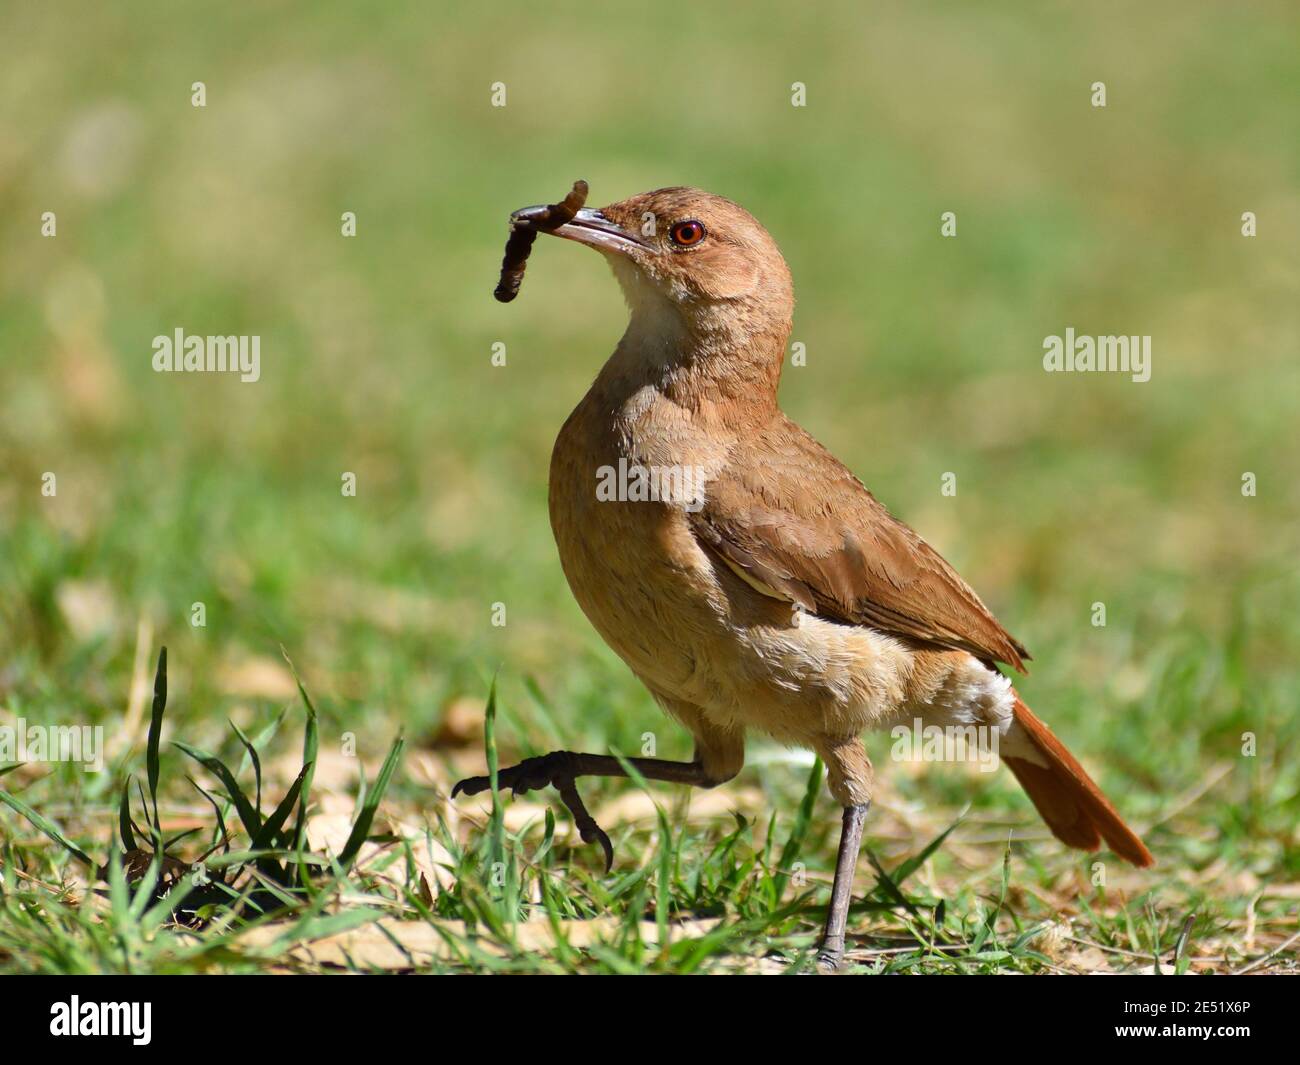 rufous hornero (Furnarius rufus), national bird of Argentina and Uruguay, feeding on the ground in a public park in Buenos Aires Stock Photo